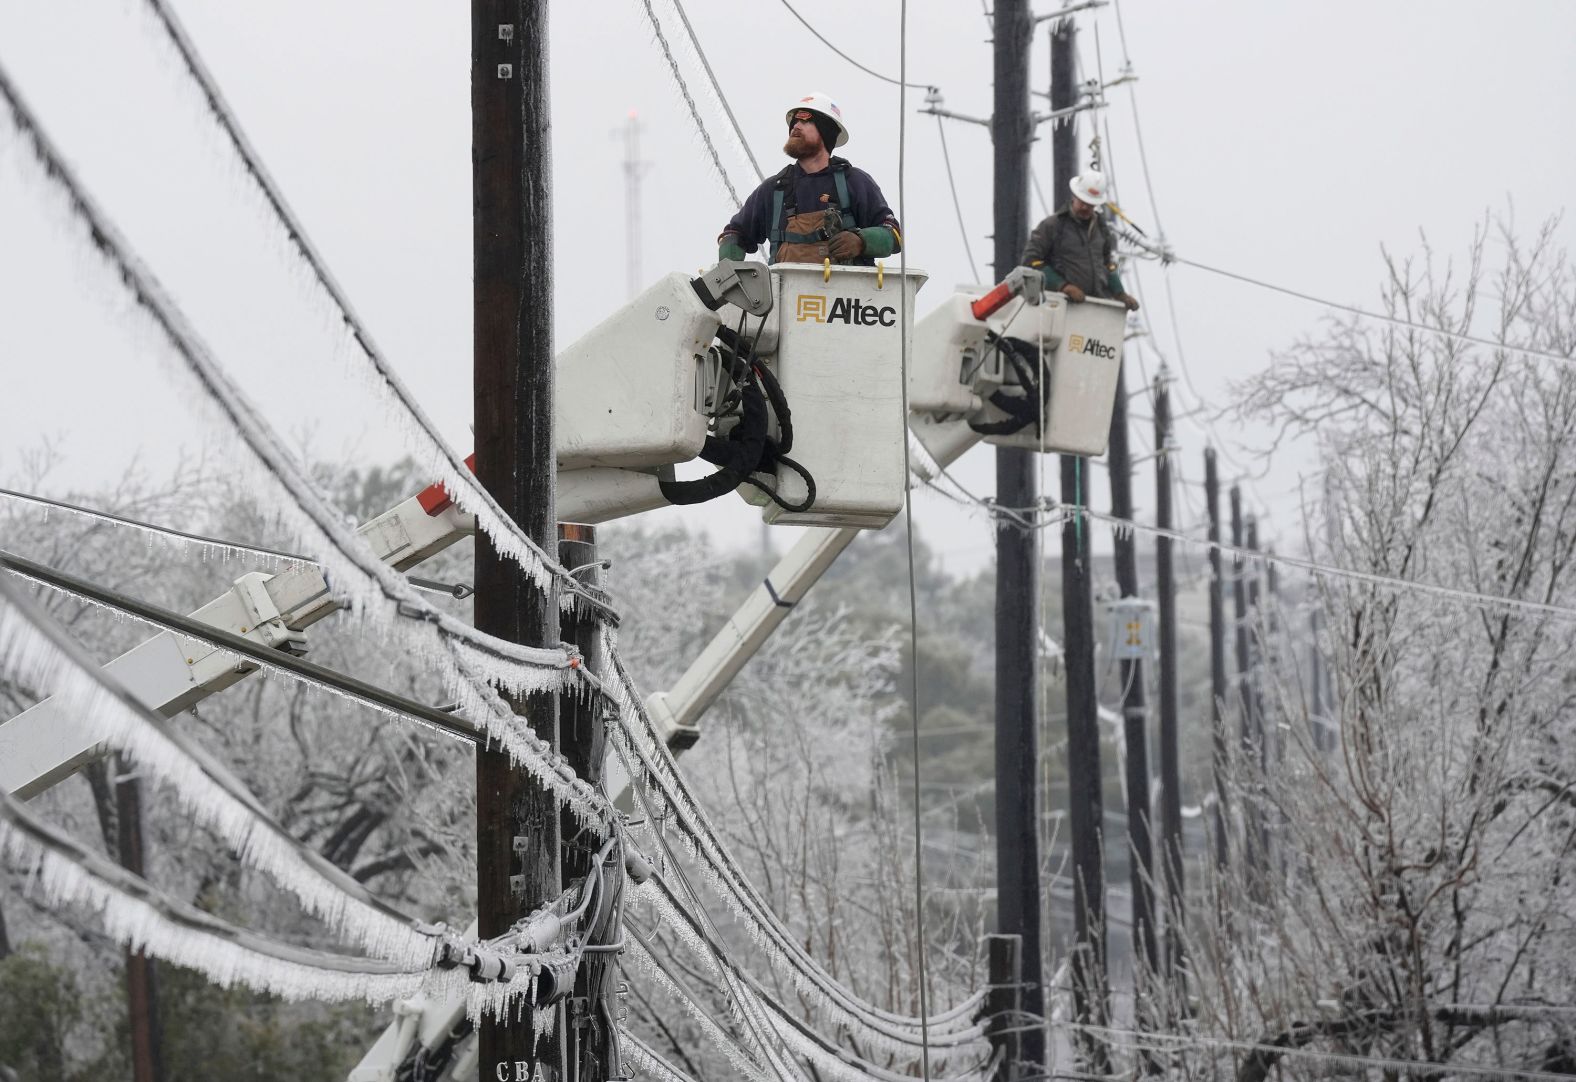 Austin Energy workers Ken Gray, left, and Chad Sefcik work to restore power on ice-covered lines in Austin, Texas, on Wednesday, February 1. <a href="index.php?page=&url=https%3A%2F%2Fwww.cnn.com%2F2023%2F02%2F01%2Fweather%2Fwinter-ice-storm-south-central-us-wednesday%2Findex.html" target="_blank">A wave of ice and sleet</a> hammered parts of the southern and central United States.